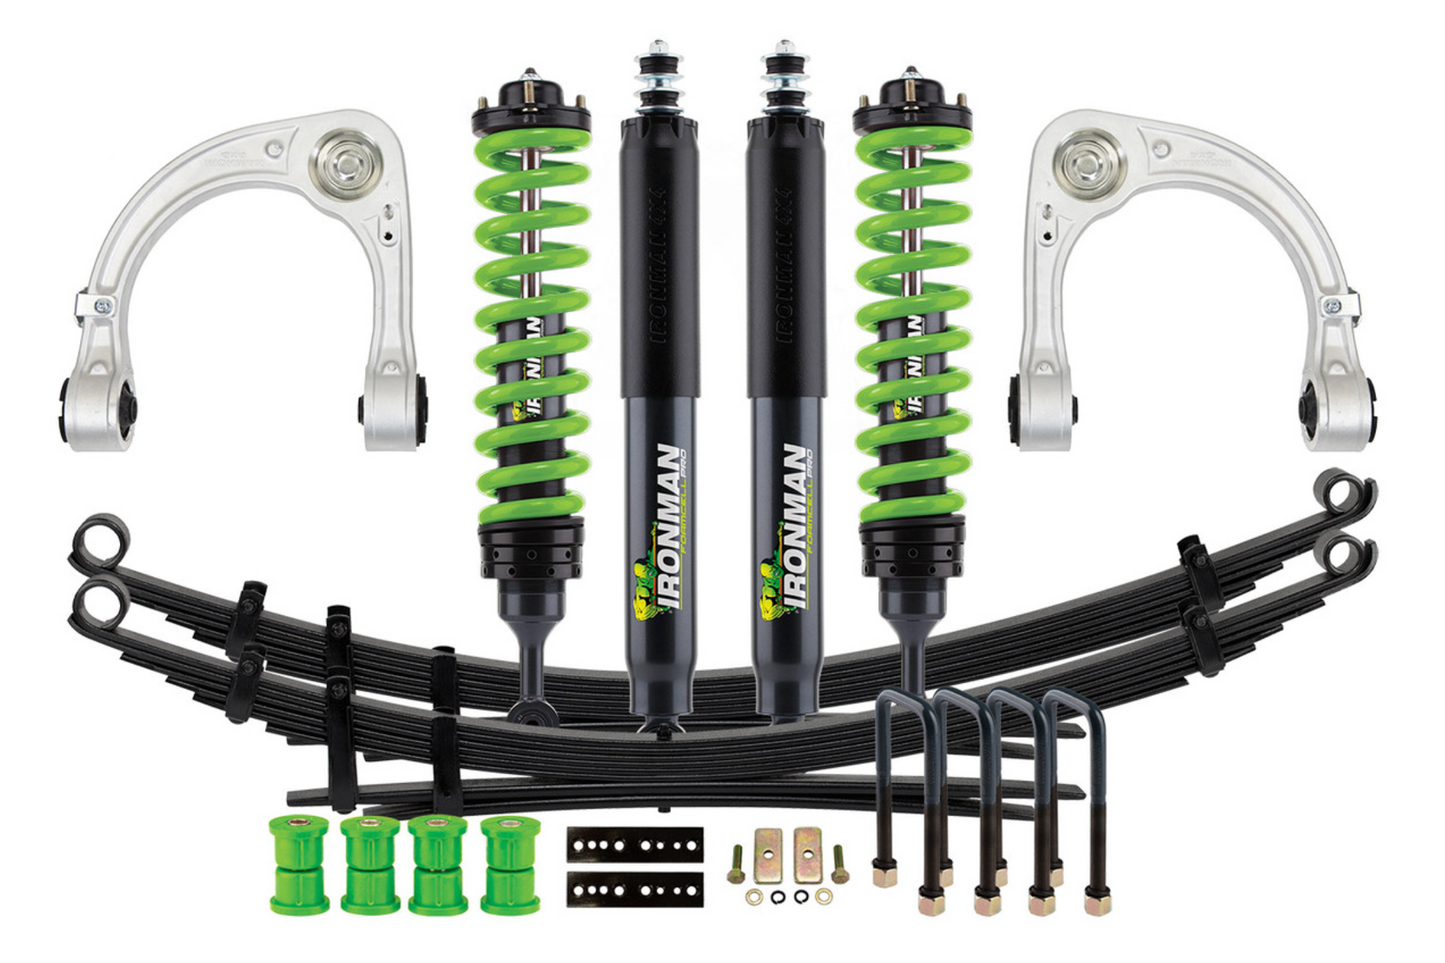 IRONMAN 4x4 FOAM CELL PRO SUSPENSION LIFT KIT & LEAF SPRINGS | SUITED FOR 2005+ TOYOTA TACOMA - STAGE 2